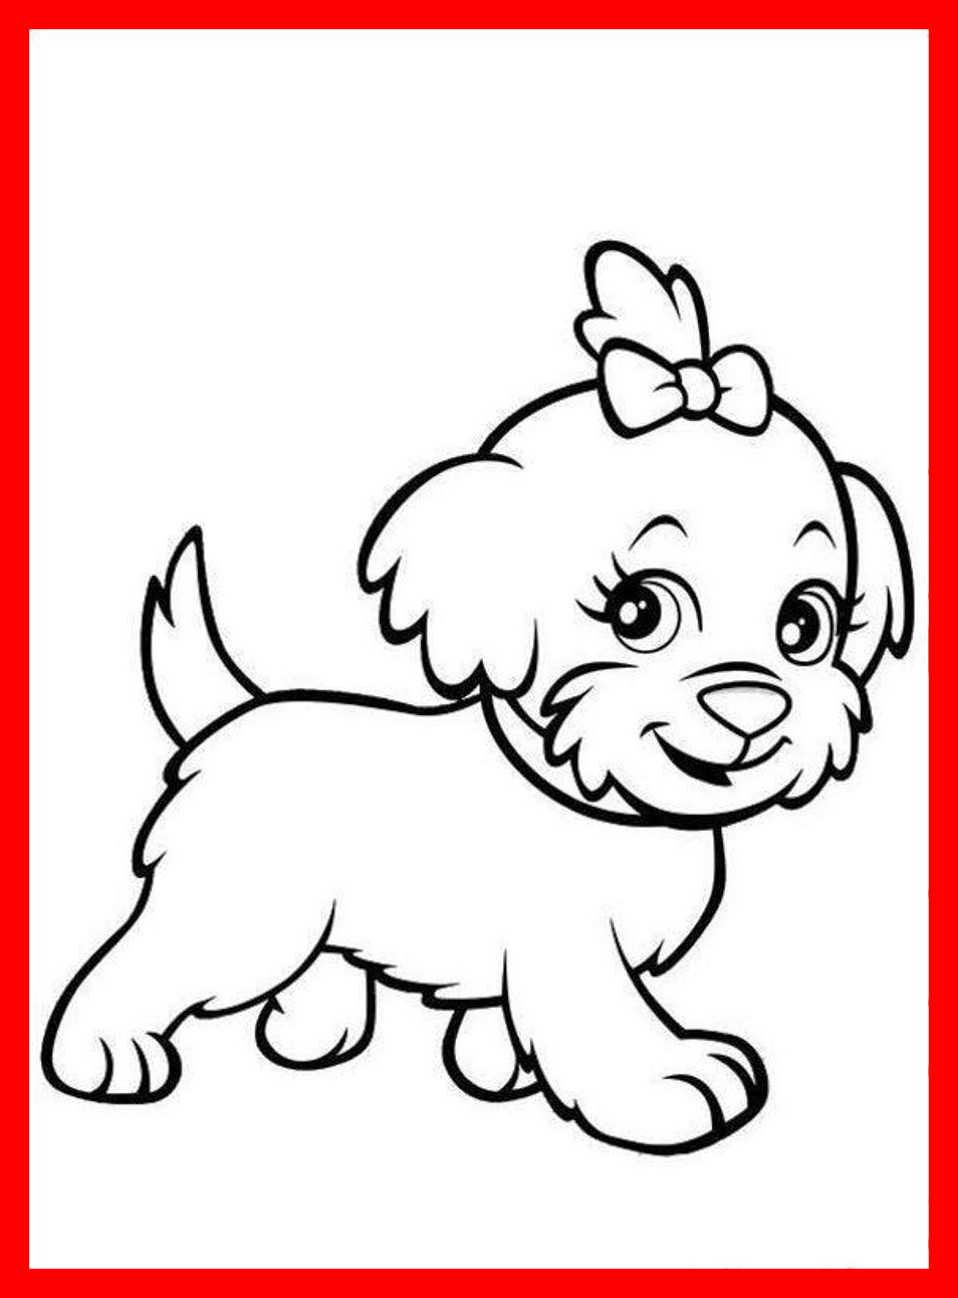 Frisbee Coloring Page at GetColorings.com | Free printable colorings